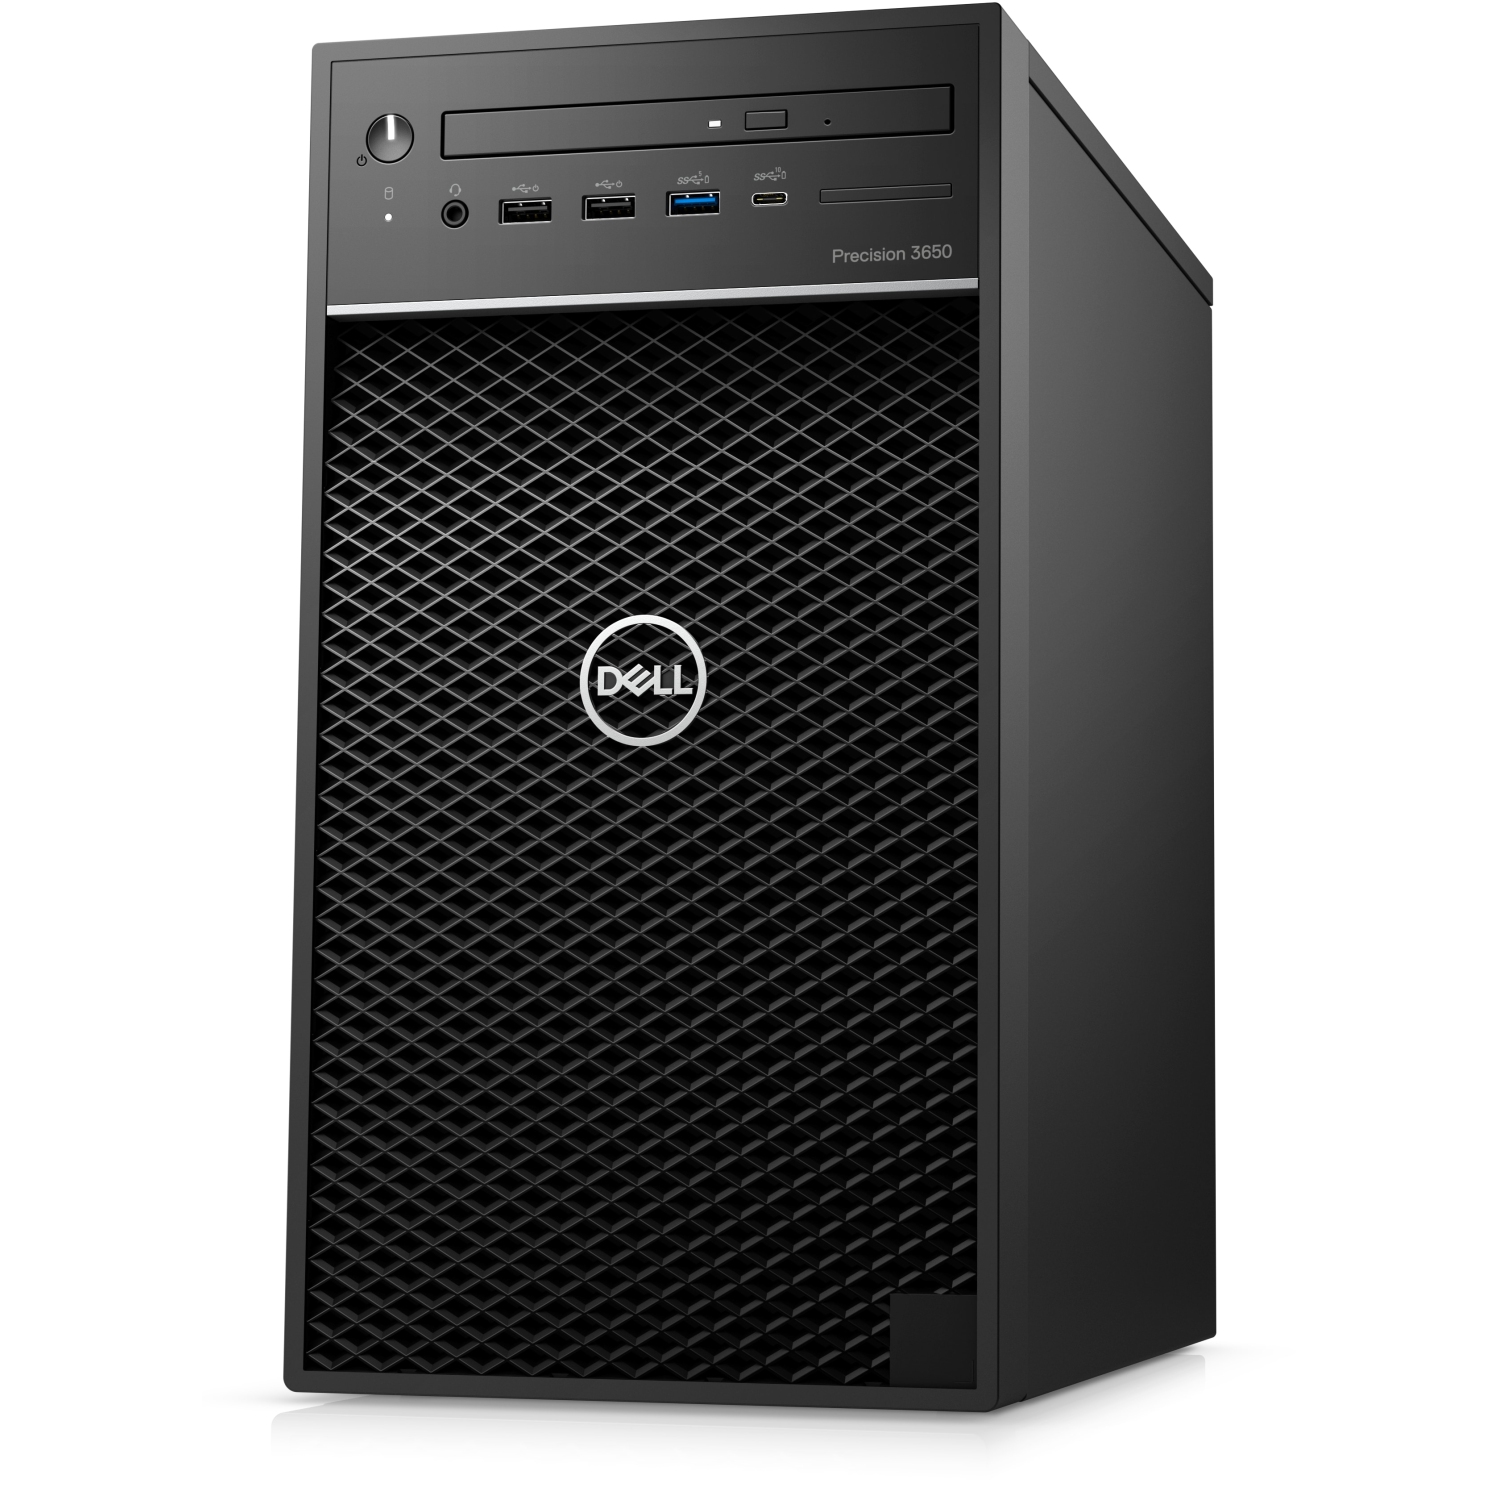 Refurbished (Excellent) - Dell Precision T3650 Workstation Desktop (2021), Core i9, 1TB SSD + 512GB SSD, 32GB RAM, RTX 3060, 8 Cores @ 5.3 GHz, 11th Gen CPU Certified